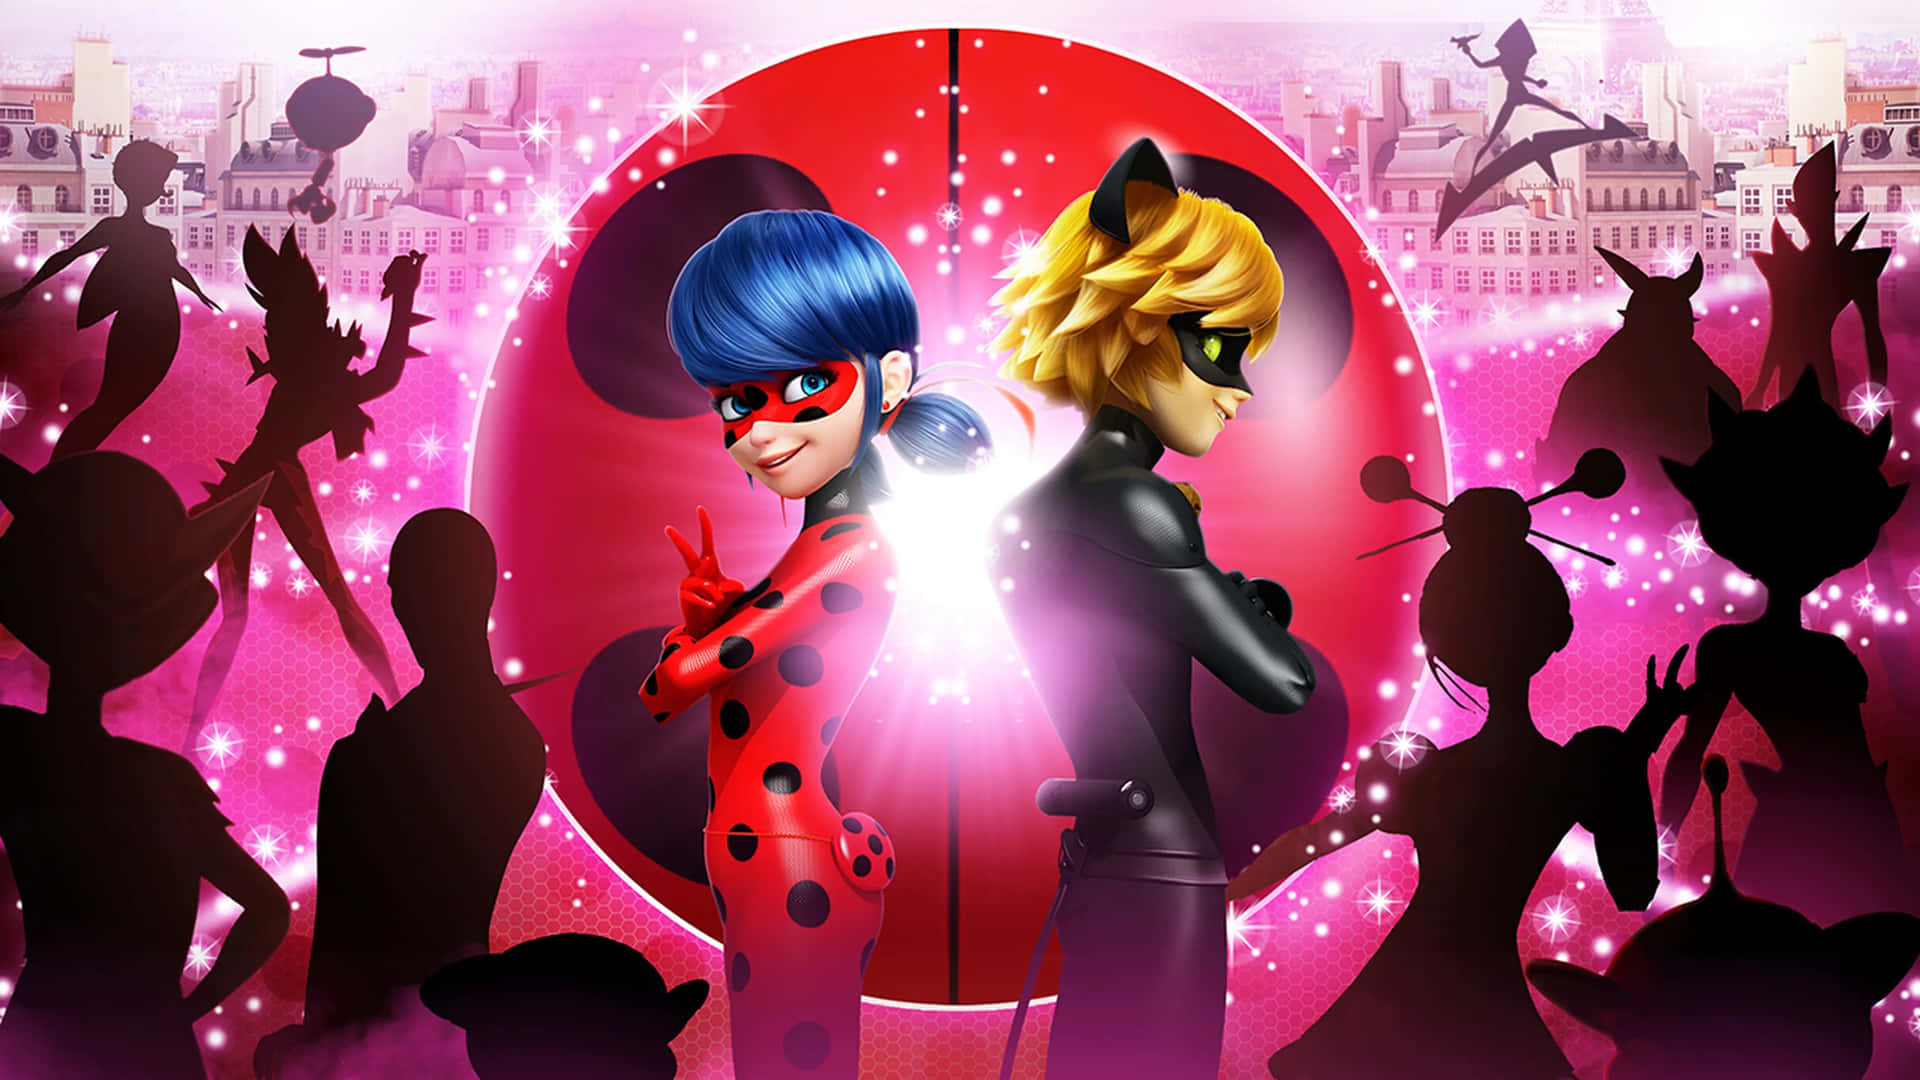 Lady Bug and Cat Noir using their special powers to save Paris.